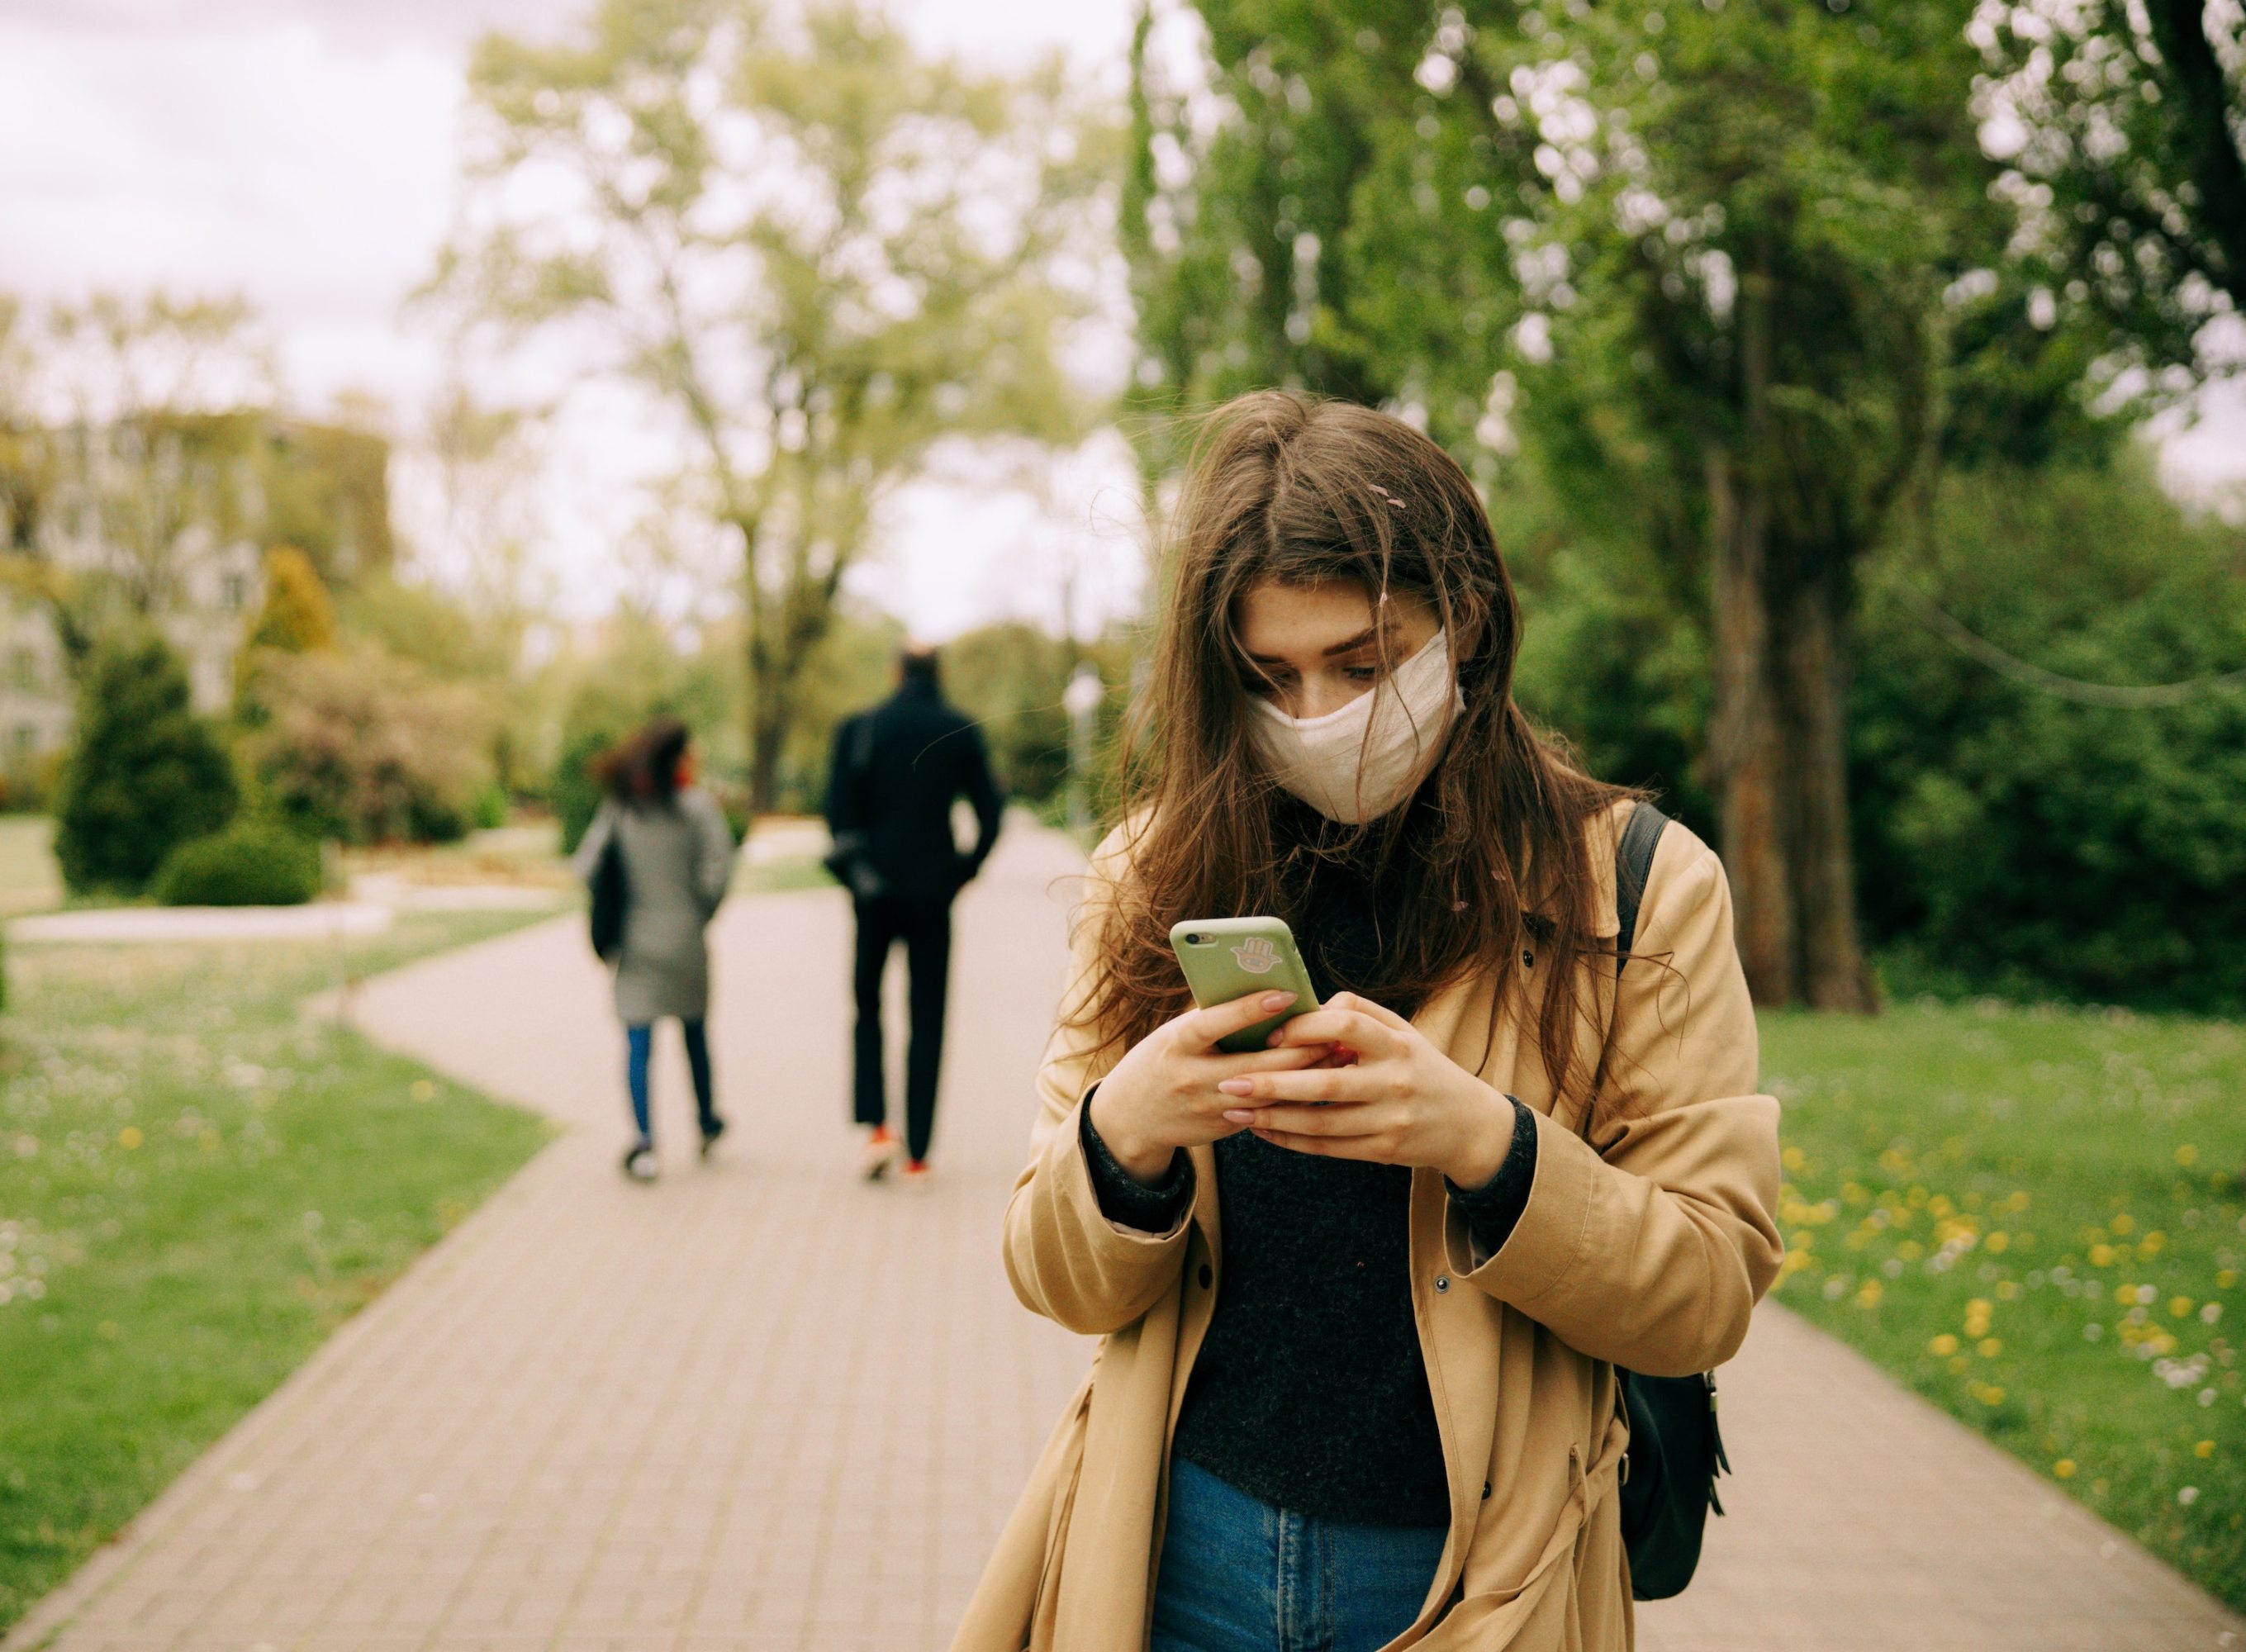 Woman on smartphone wearing face mask, with two people walking away in the background.